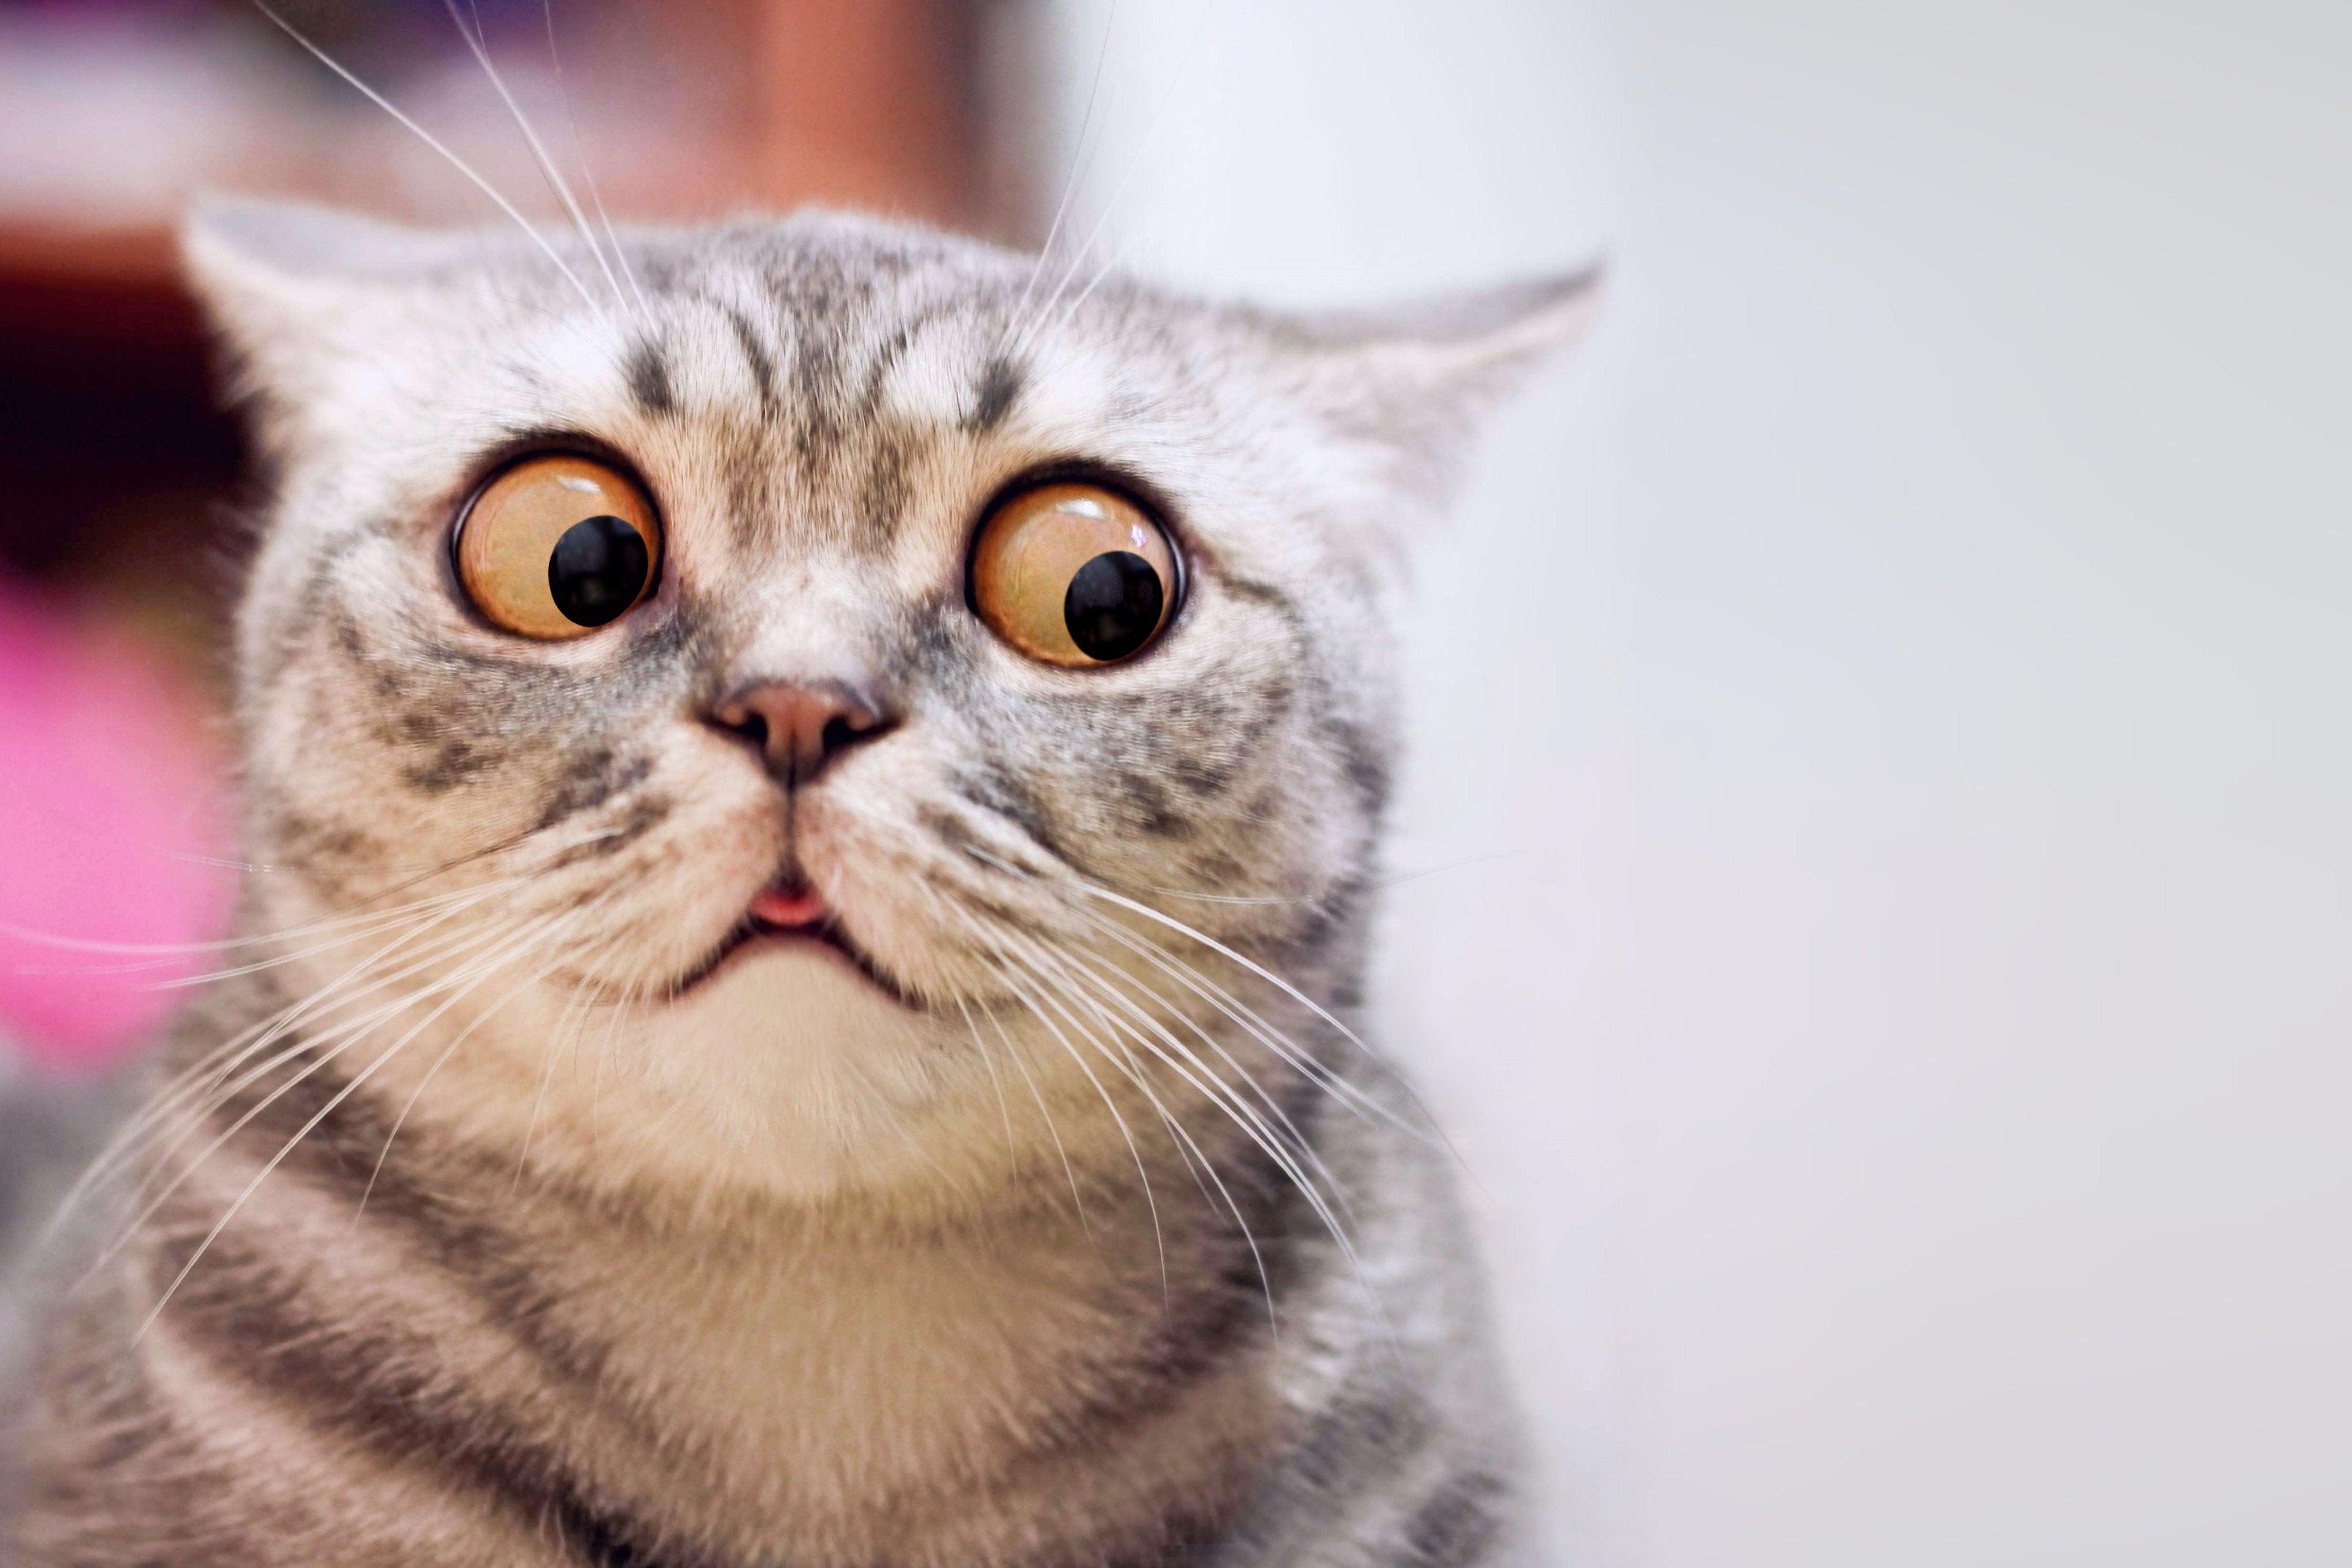 An amusing portrayal of a cat caught in a moment of surprise.Cat With A Surprised Look - Diamondartlove